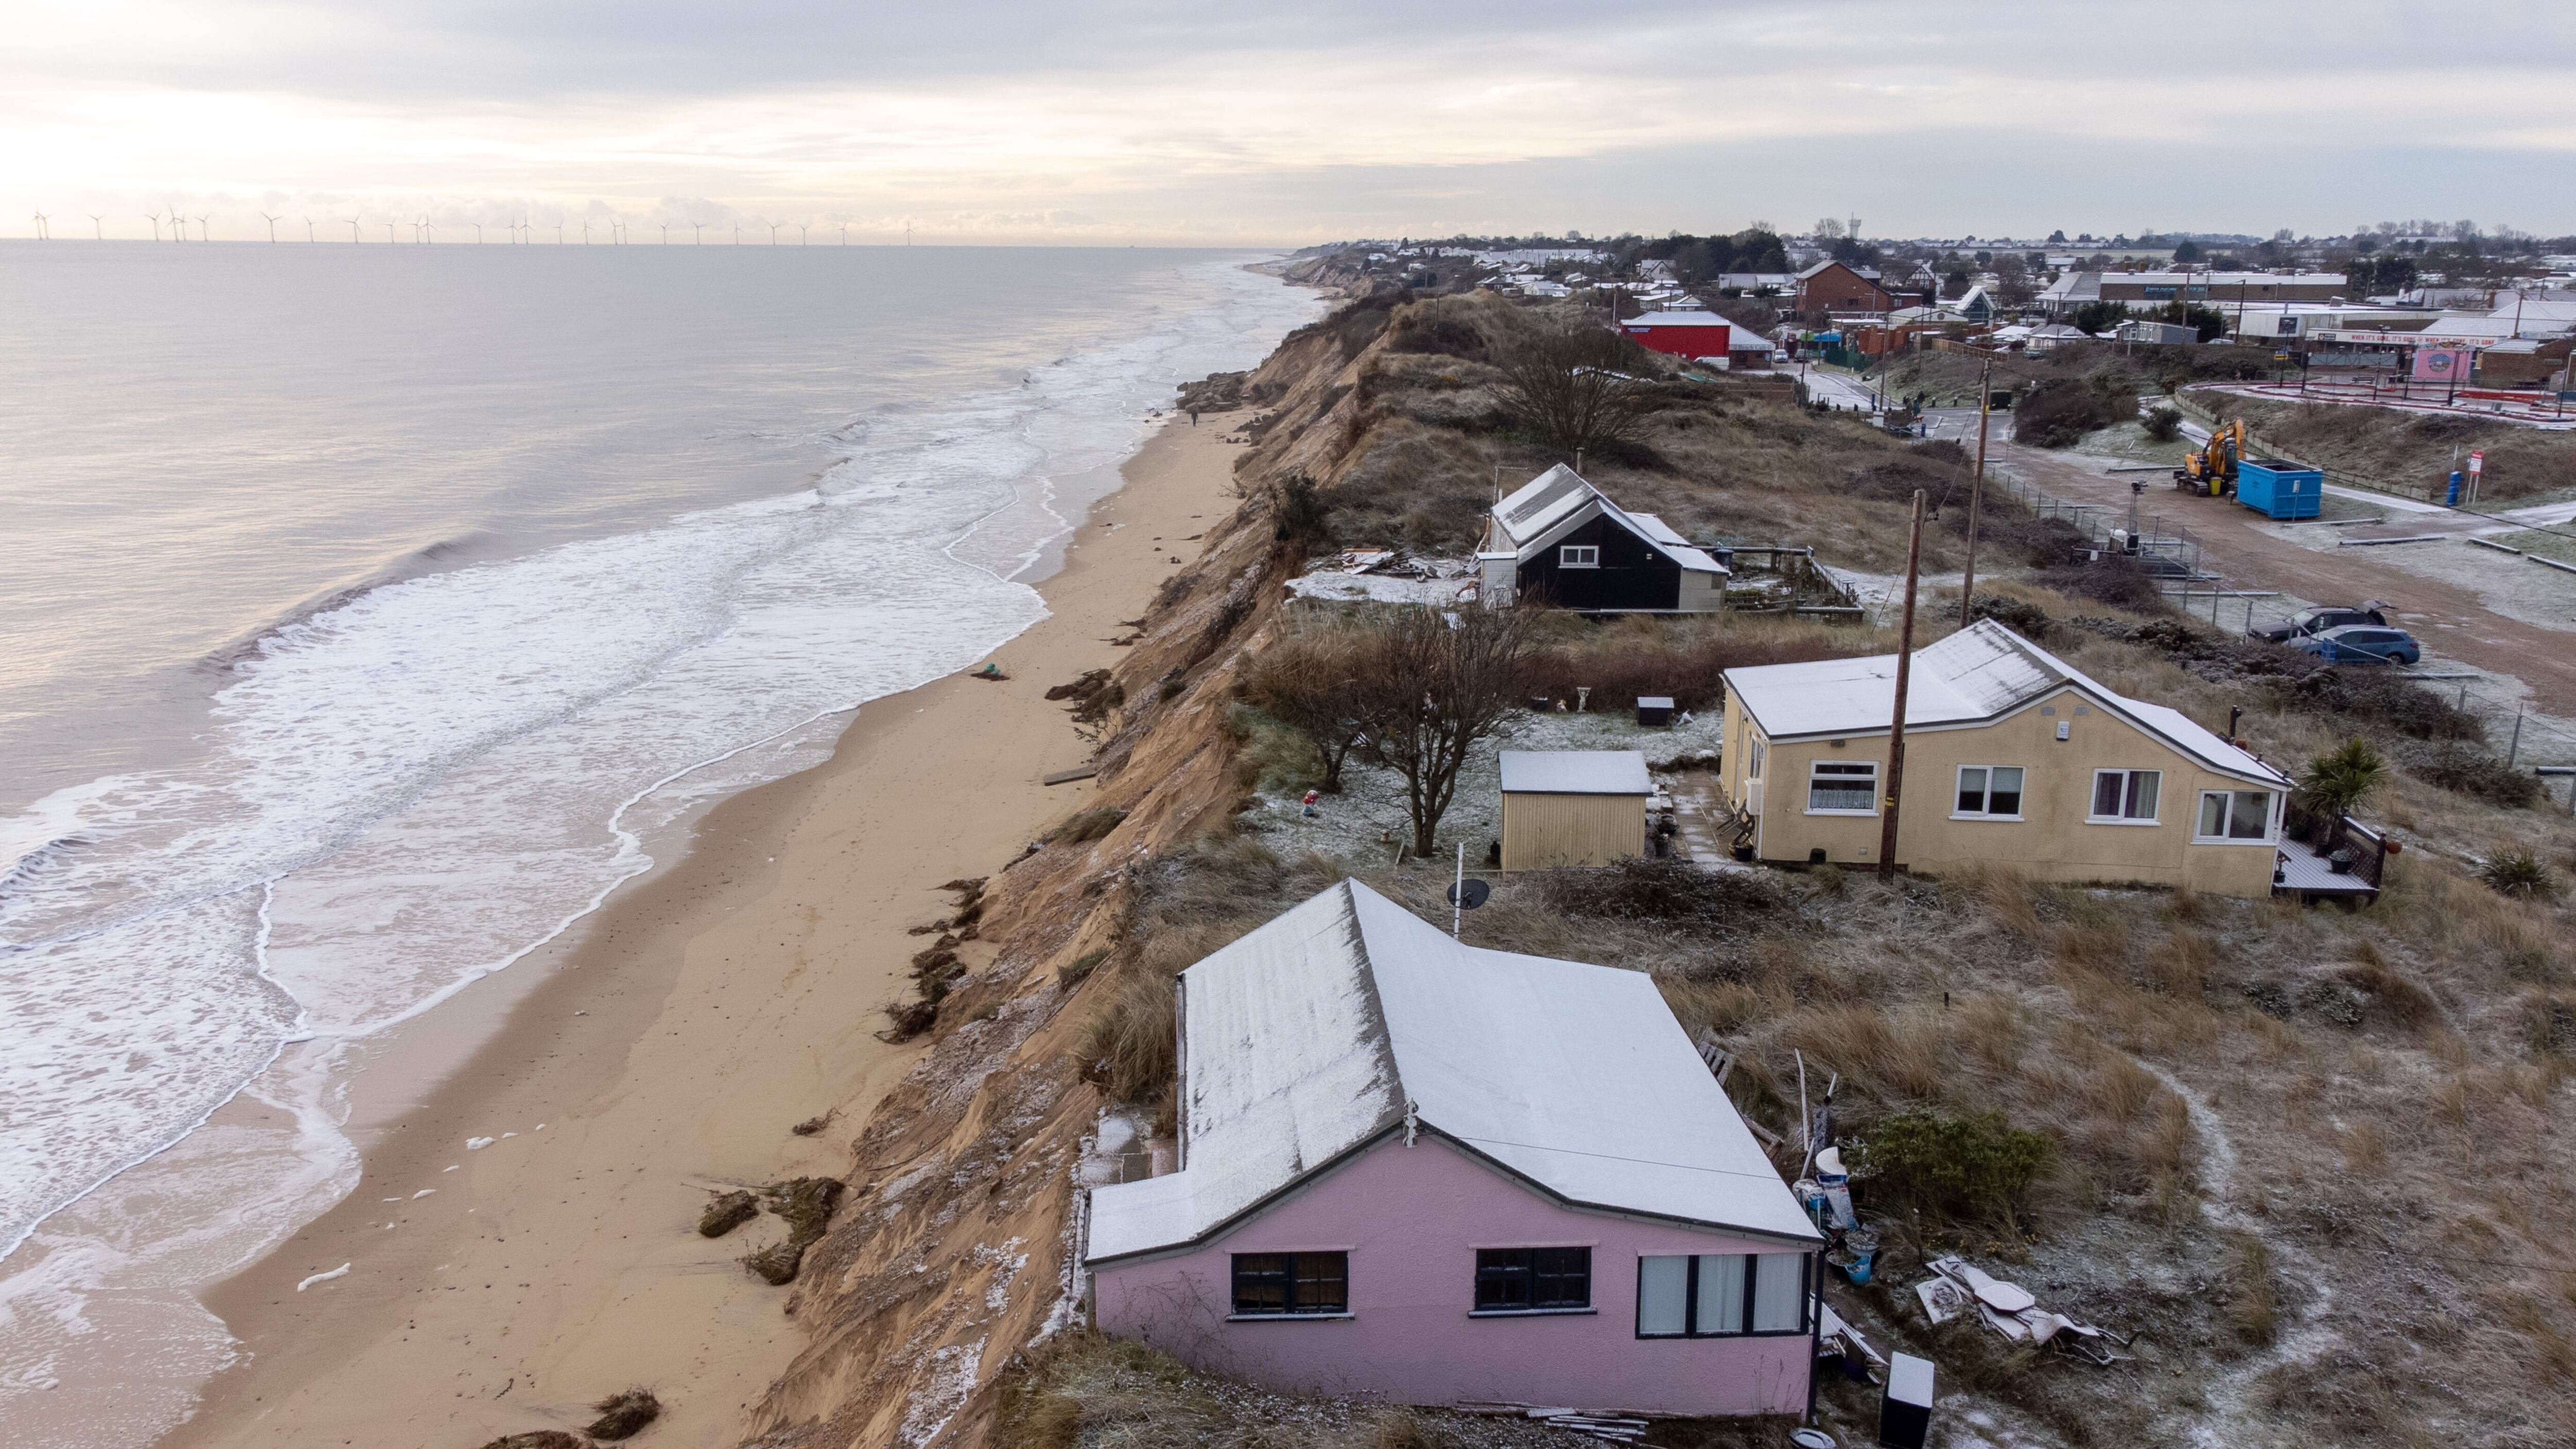 Homes close to the cliff edge at Hemsby in Norfolk, pictured in March 2023, months before the road collapse. (Joe Giddens/ PA)